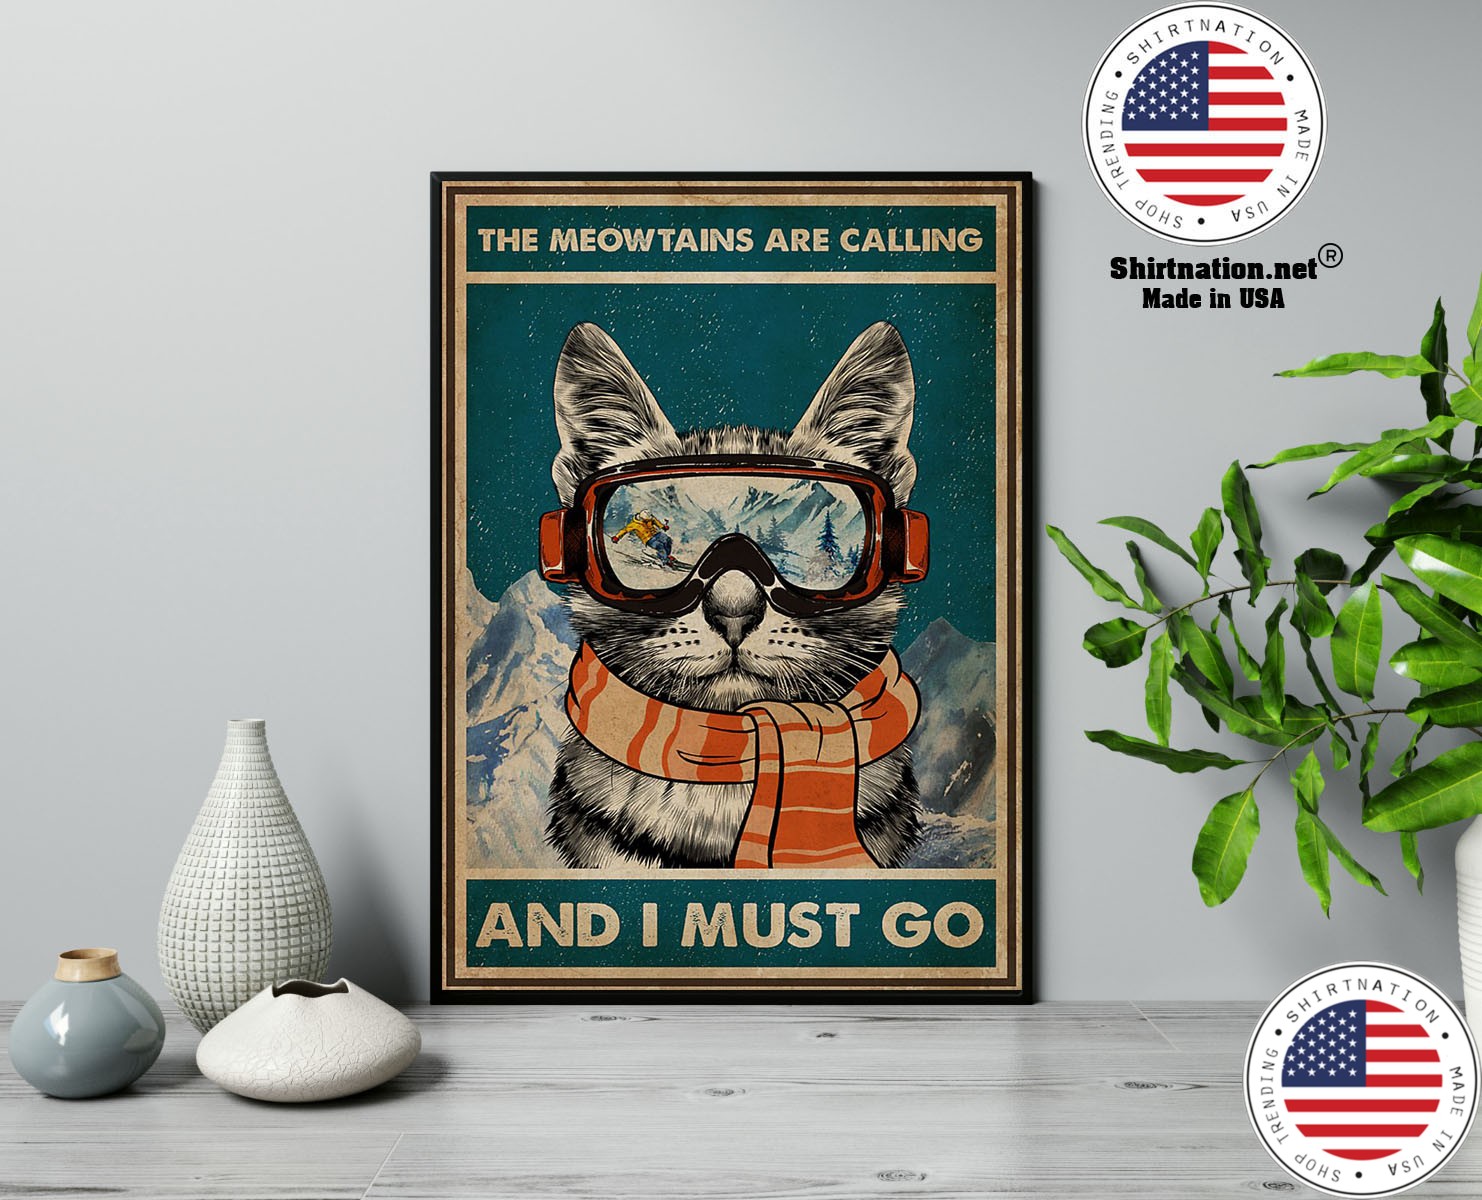 The meowtains are calling and I must go poster 13